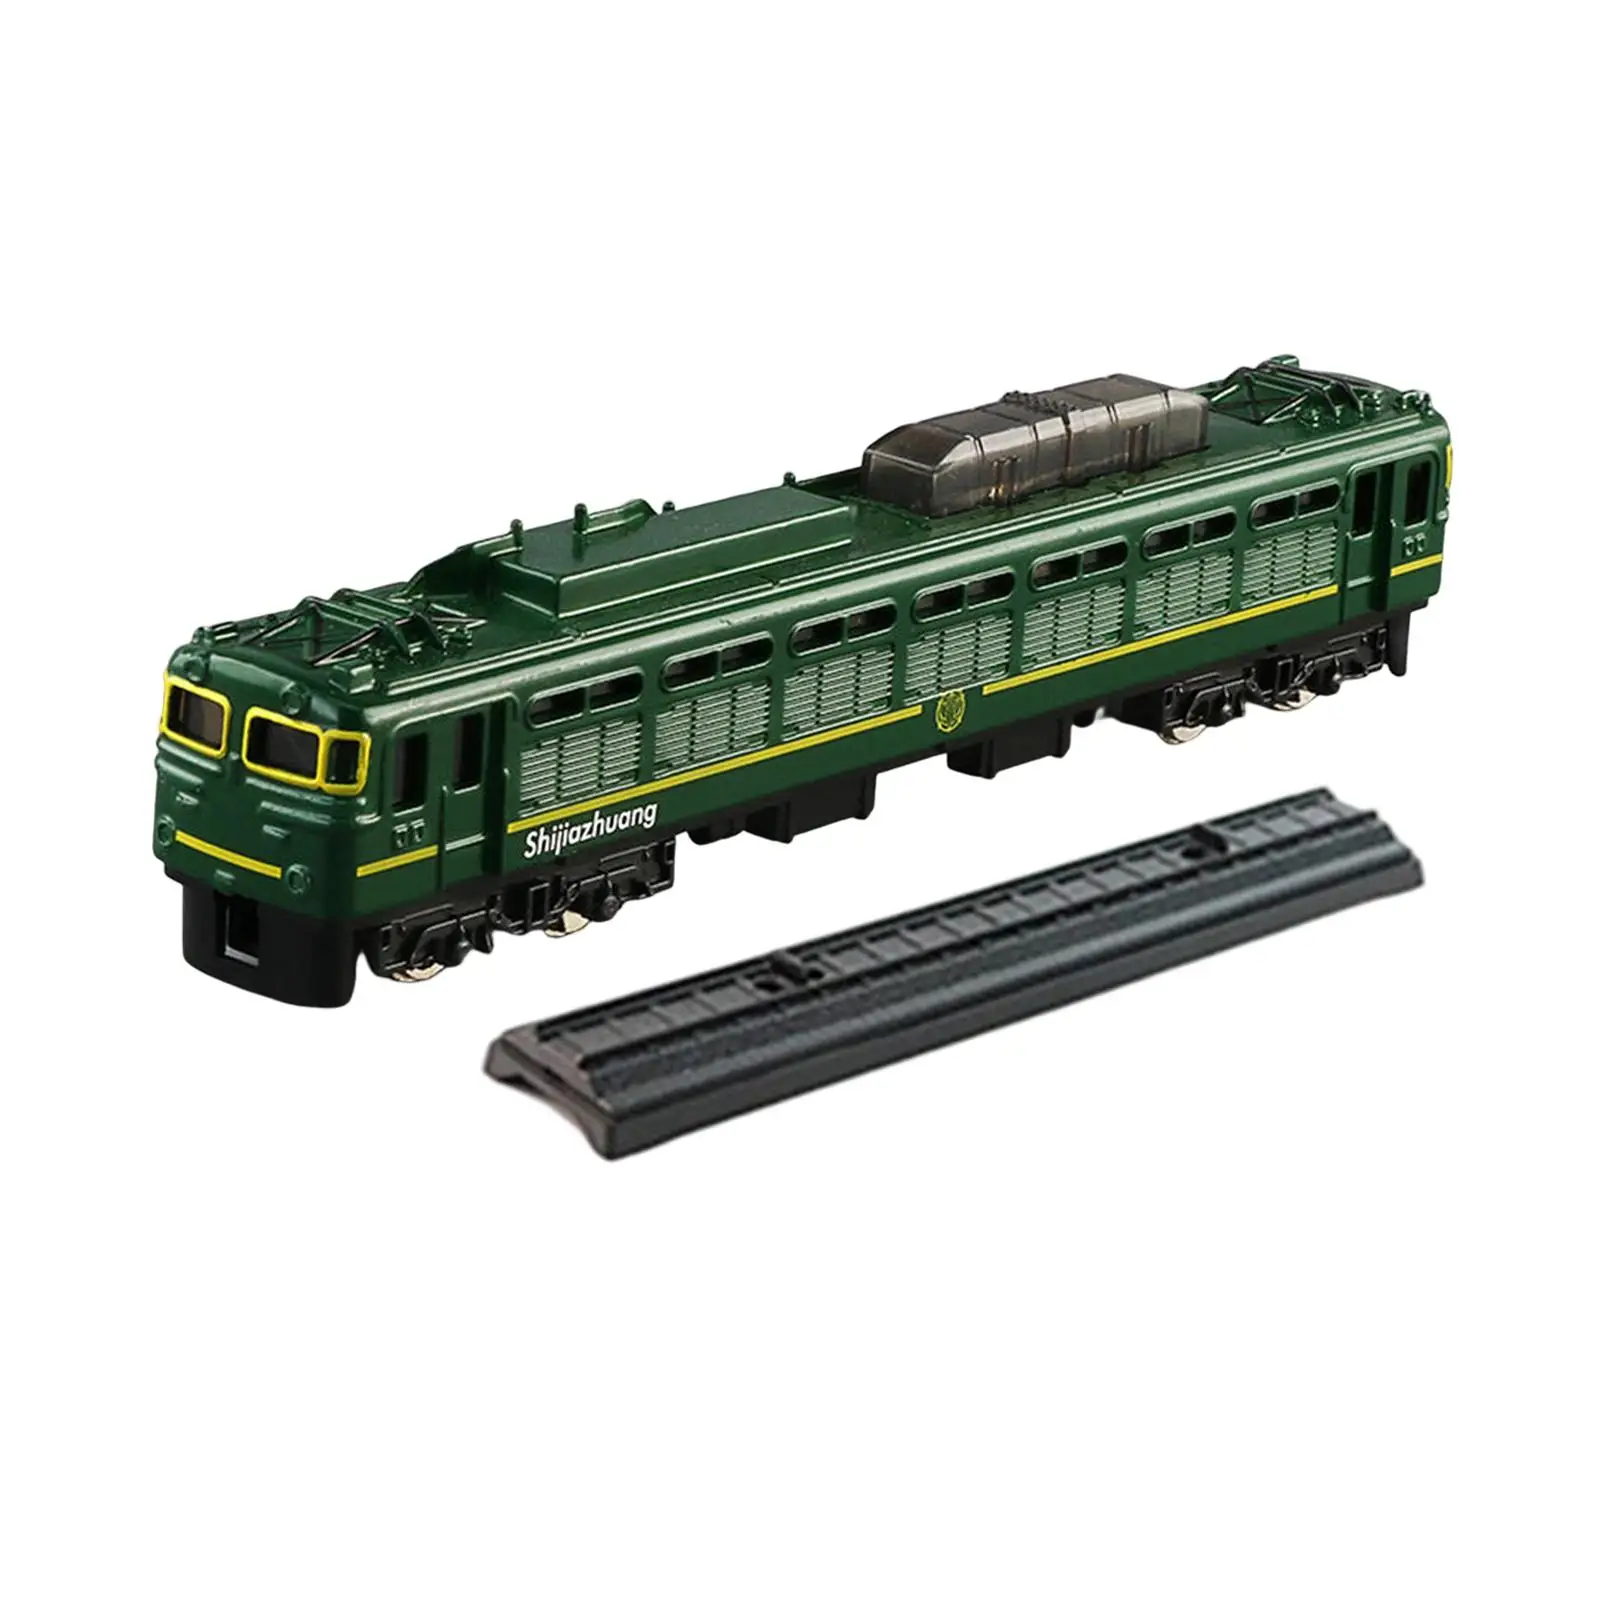 Simulation Steam Train Model Toys with Rail Diecast Model modern Locomotives for Toddlers Kids Birthday Gifts